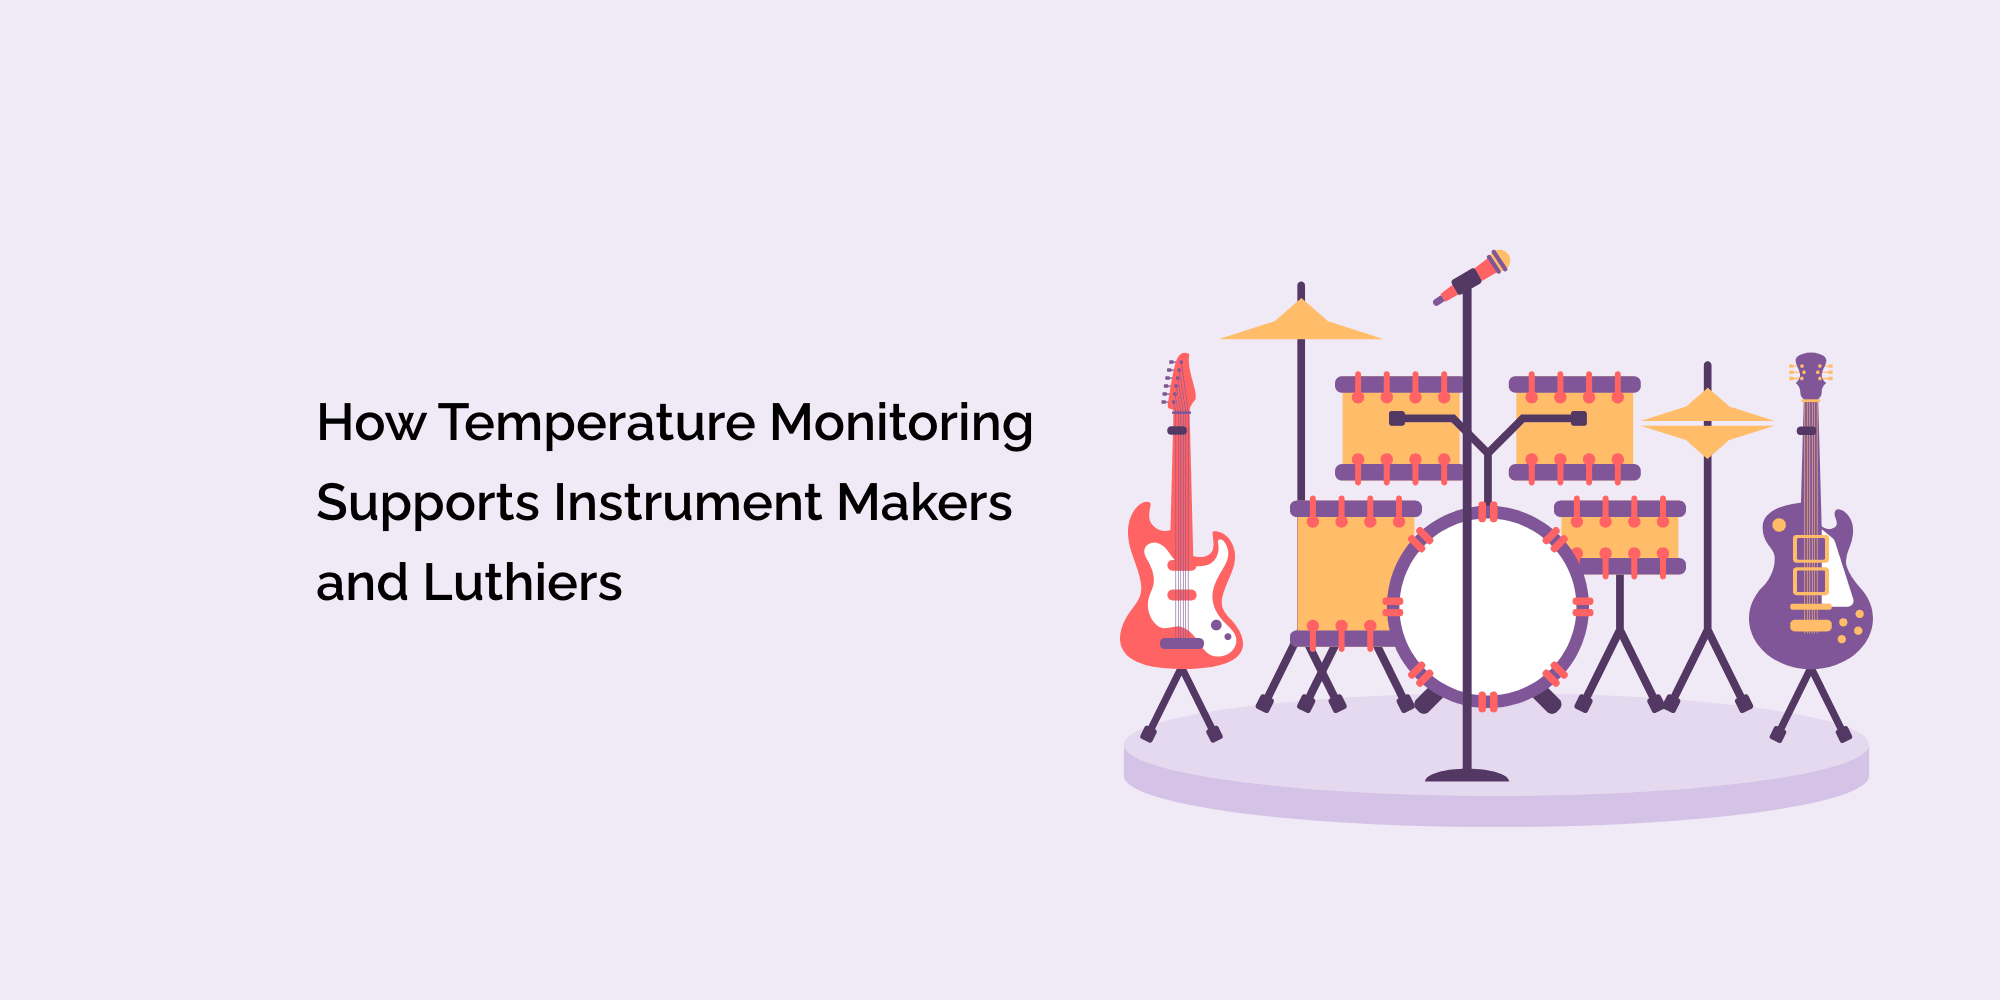 How Temperature Monitoring Supports Instrument Makers and Luthiers